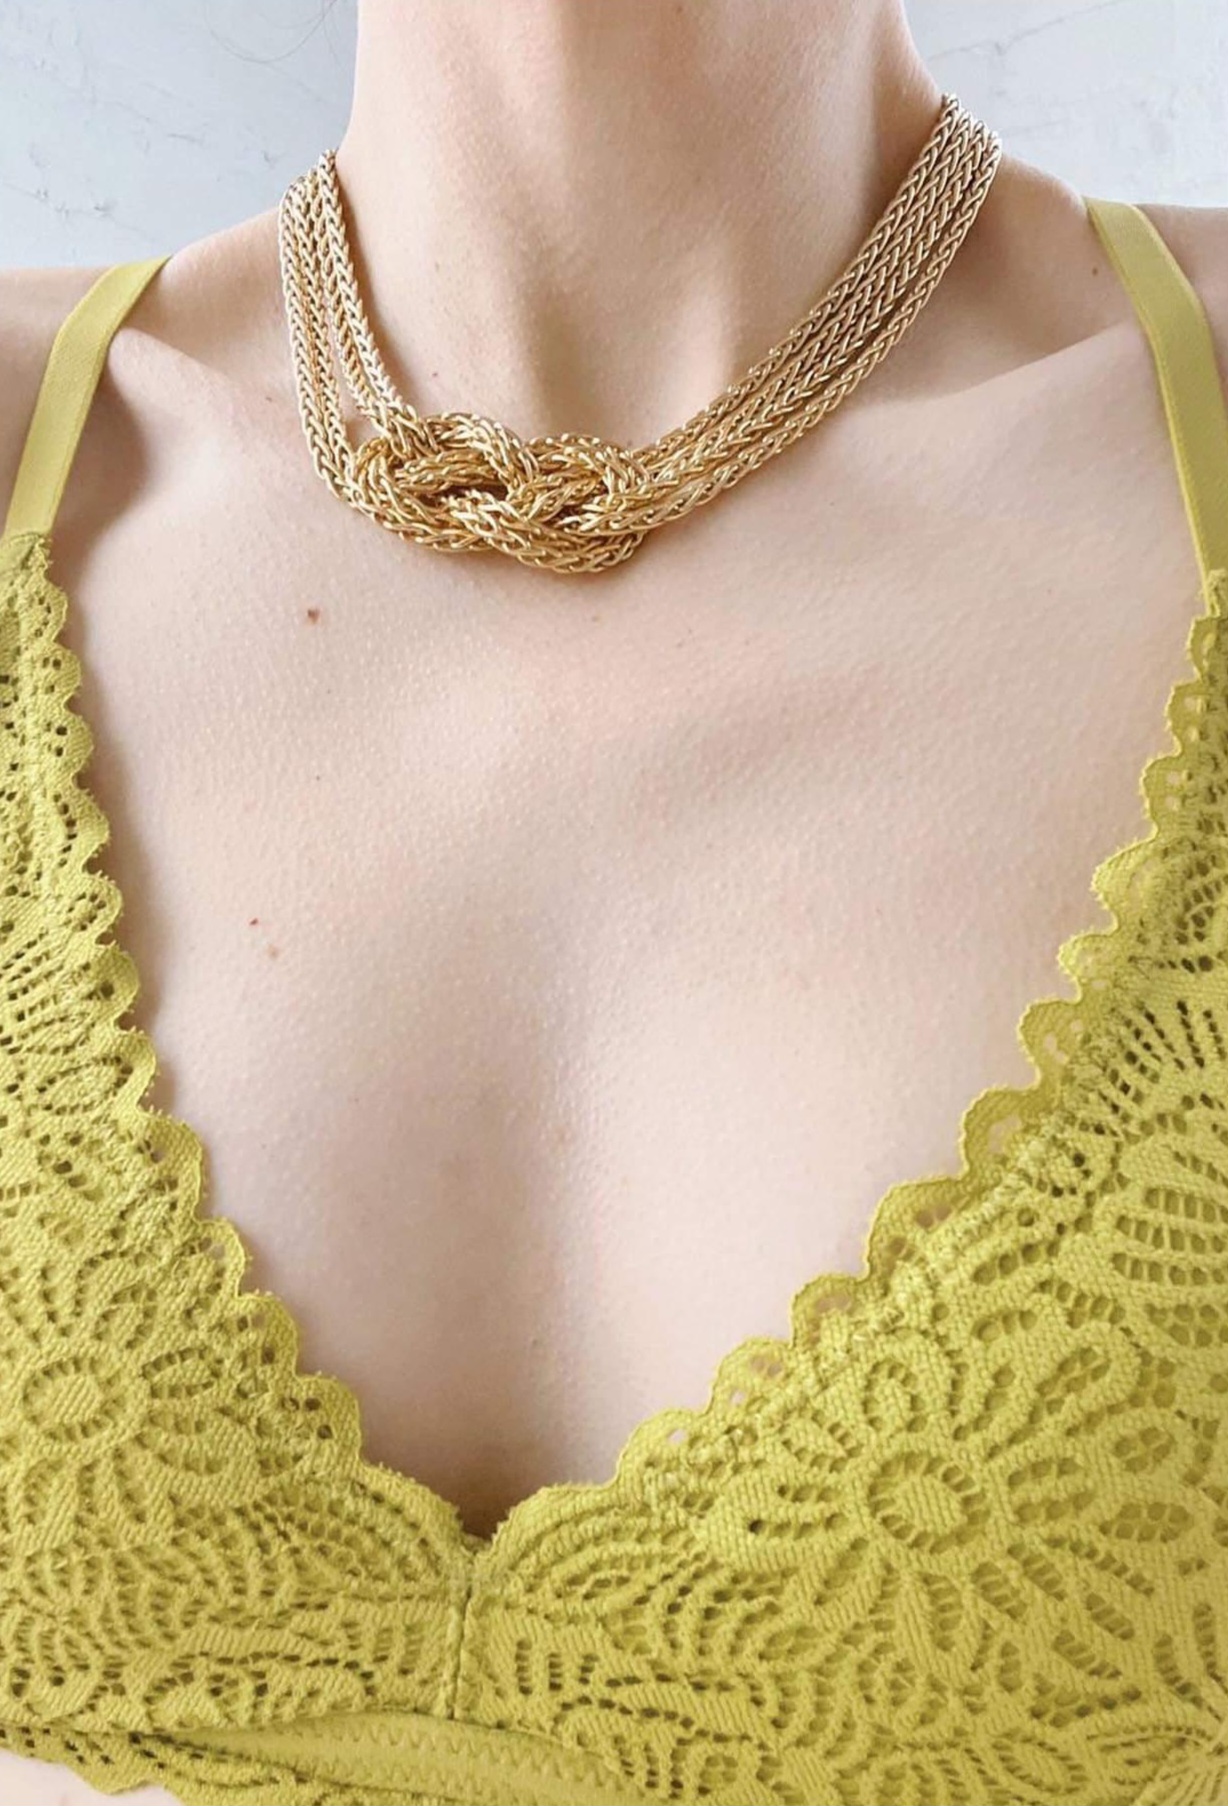 Christian Dior Knot Necklace Gold Cable & Chain Link